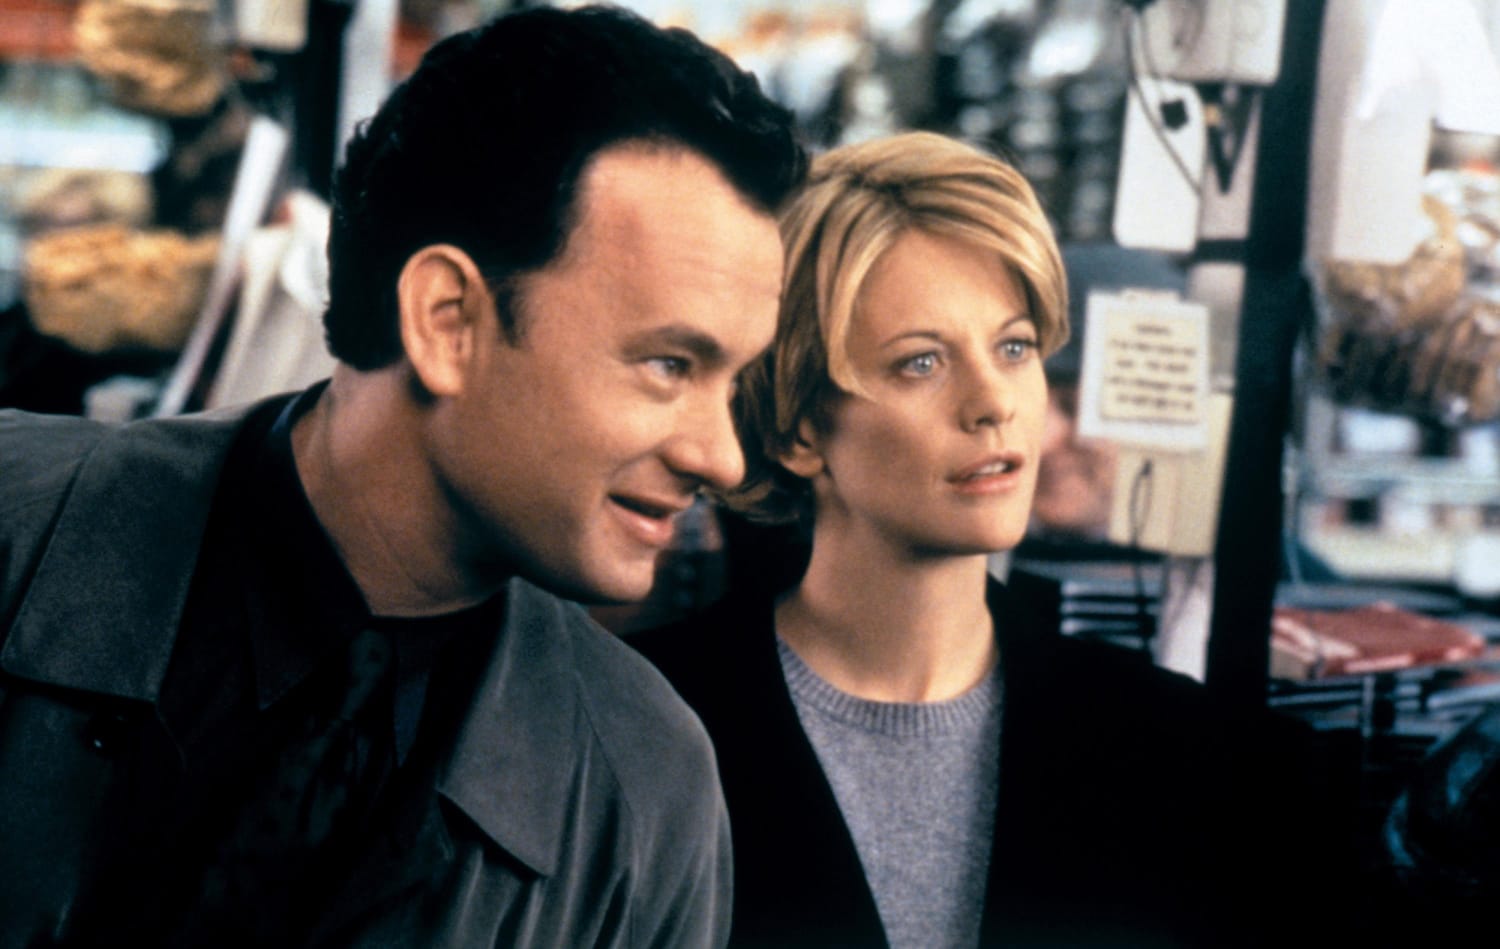 Watch You've Got Mail Full Movie - video Dailymotion